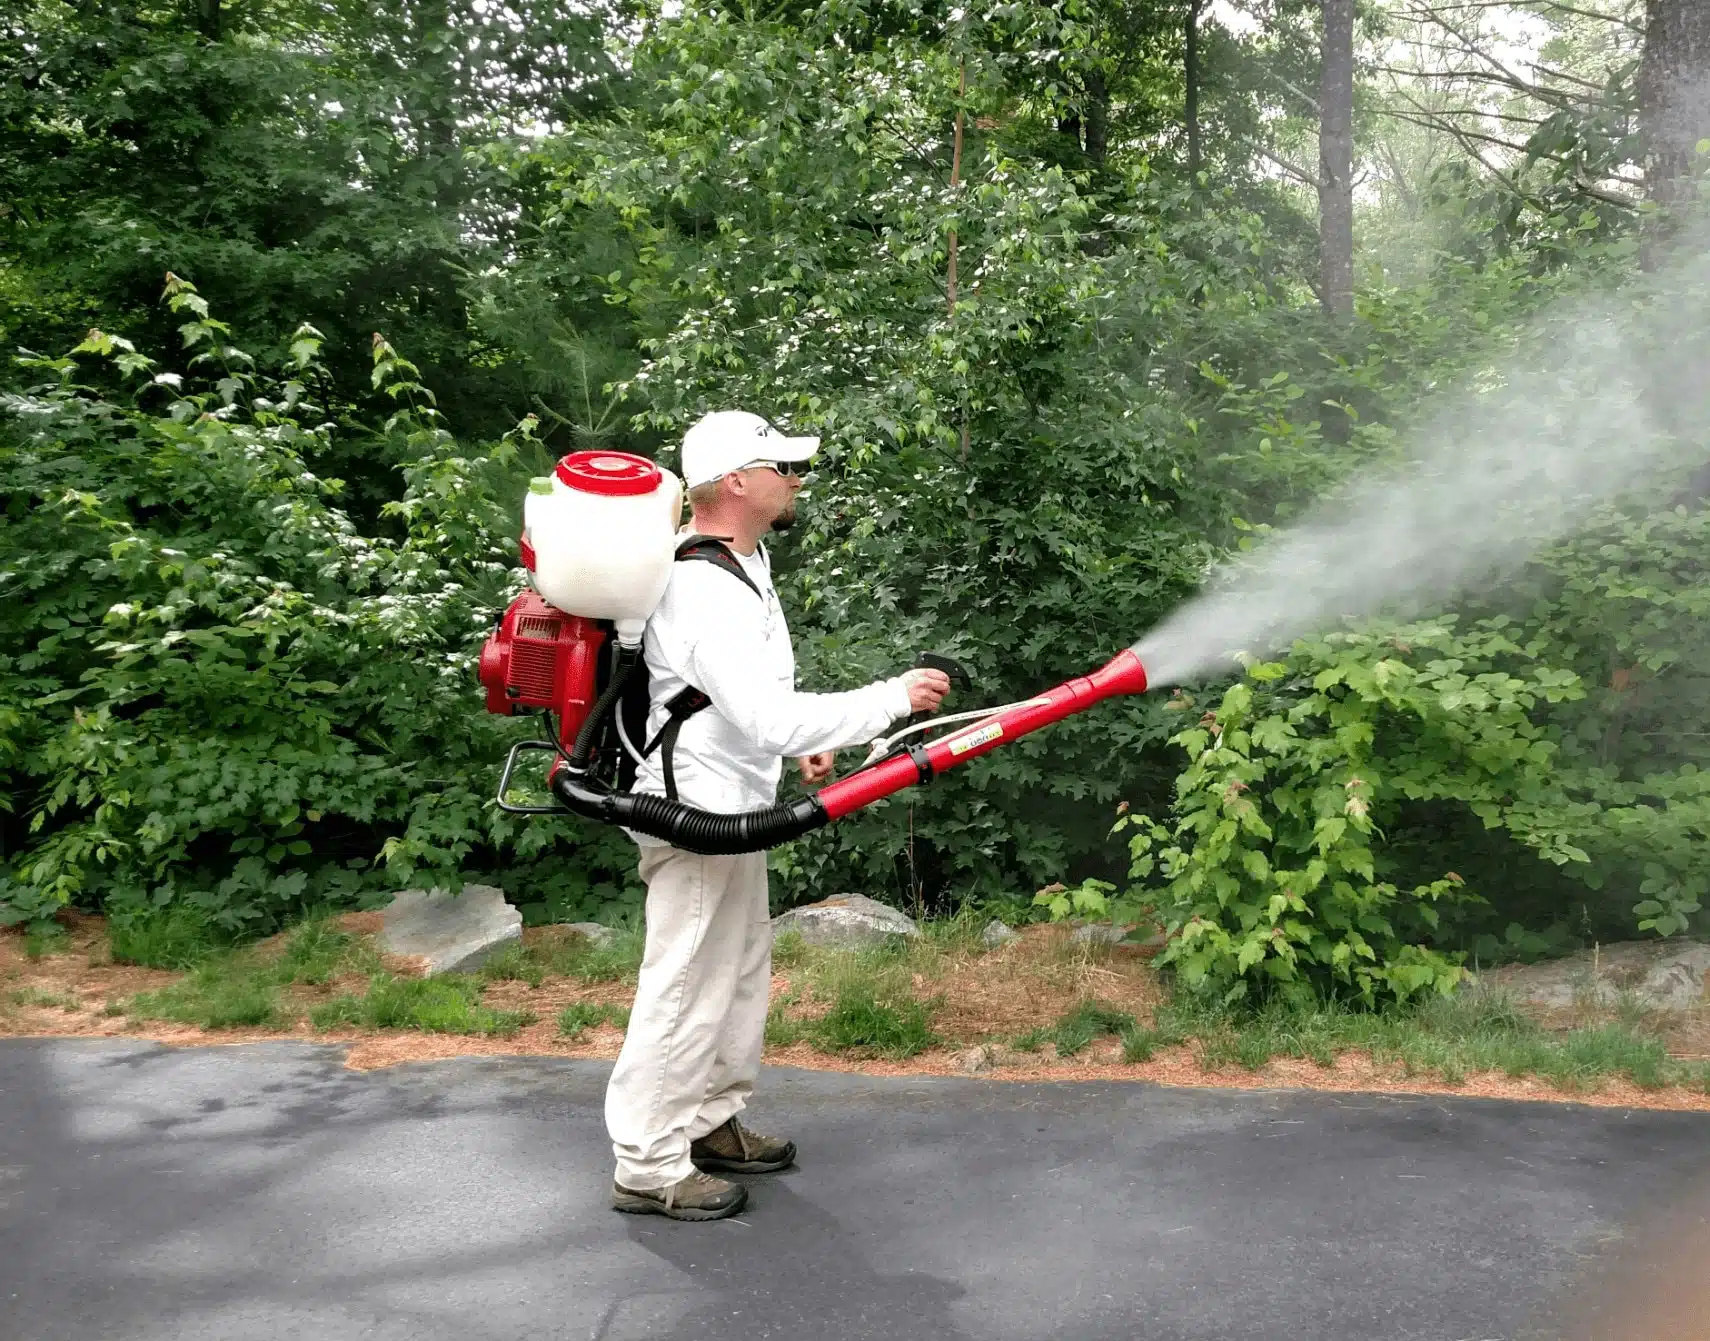 Tick and Mosquito Control in Your Yard: Tips for a Pest-Free Outdoor Space